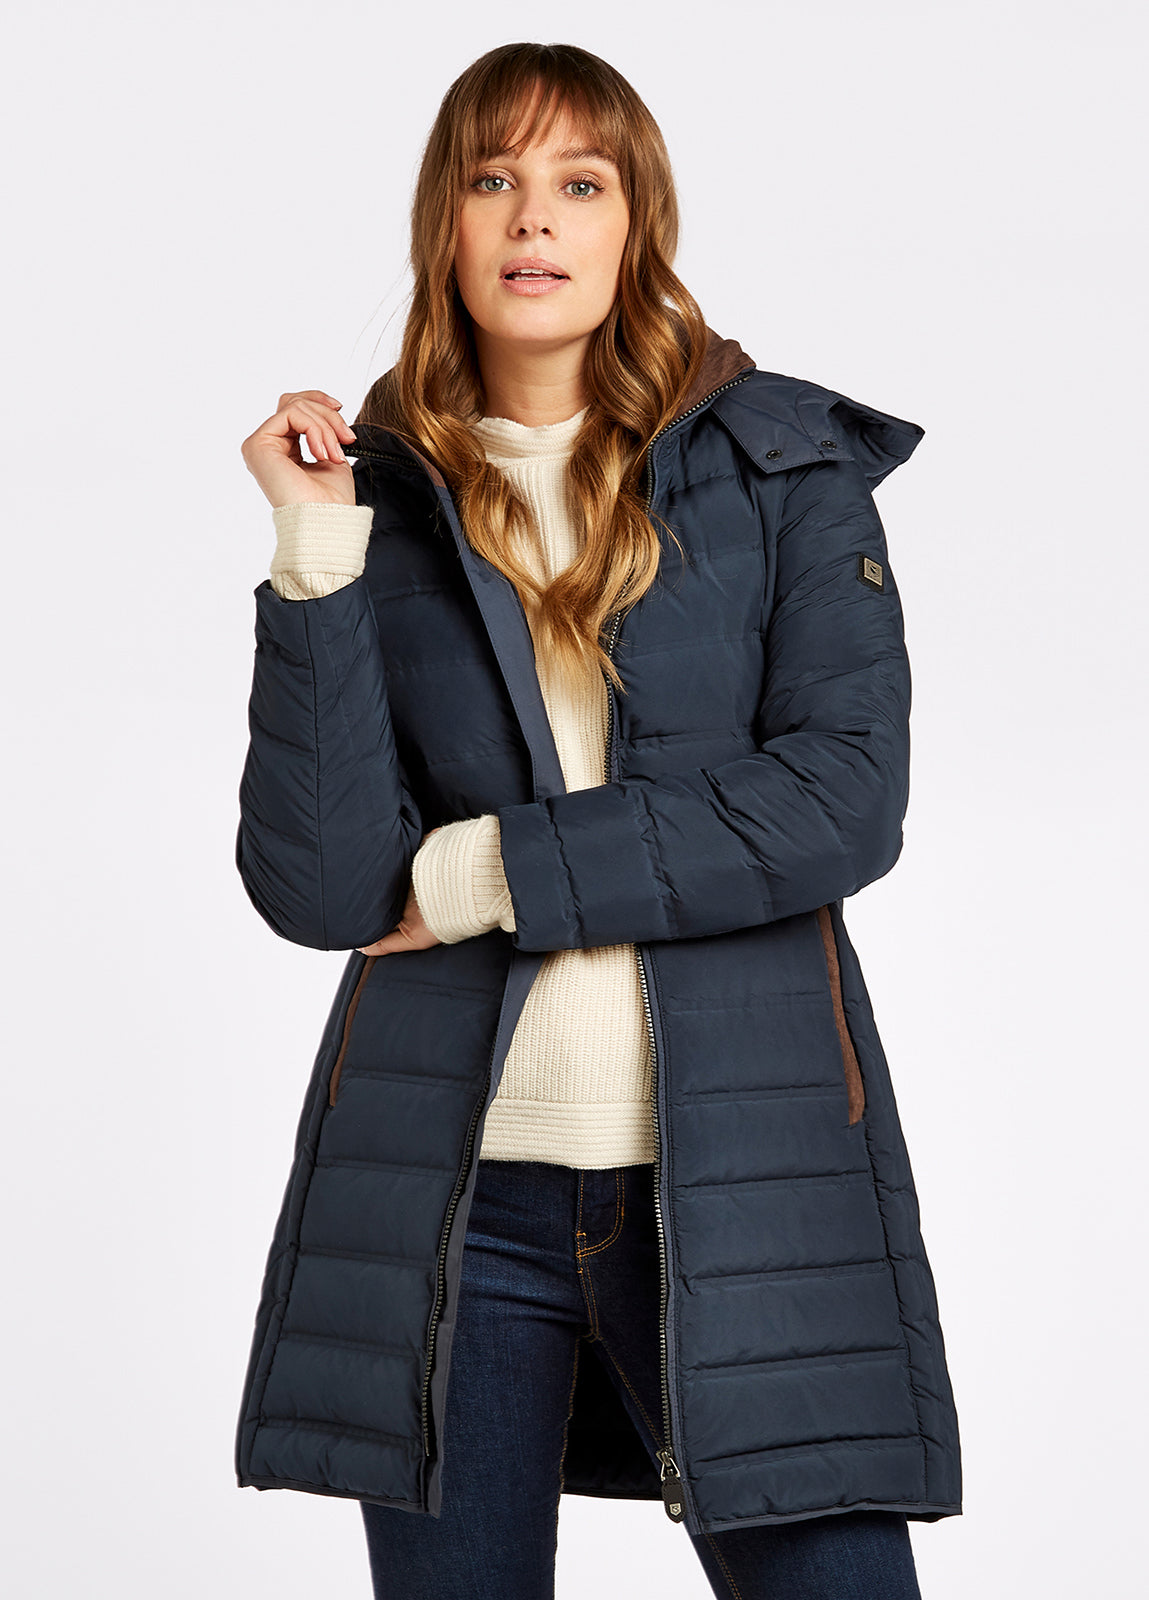 Dubarry Ballybrophy Quilted Jacket - Navy